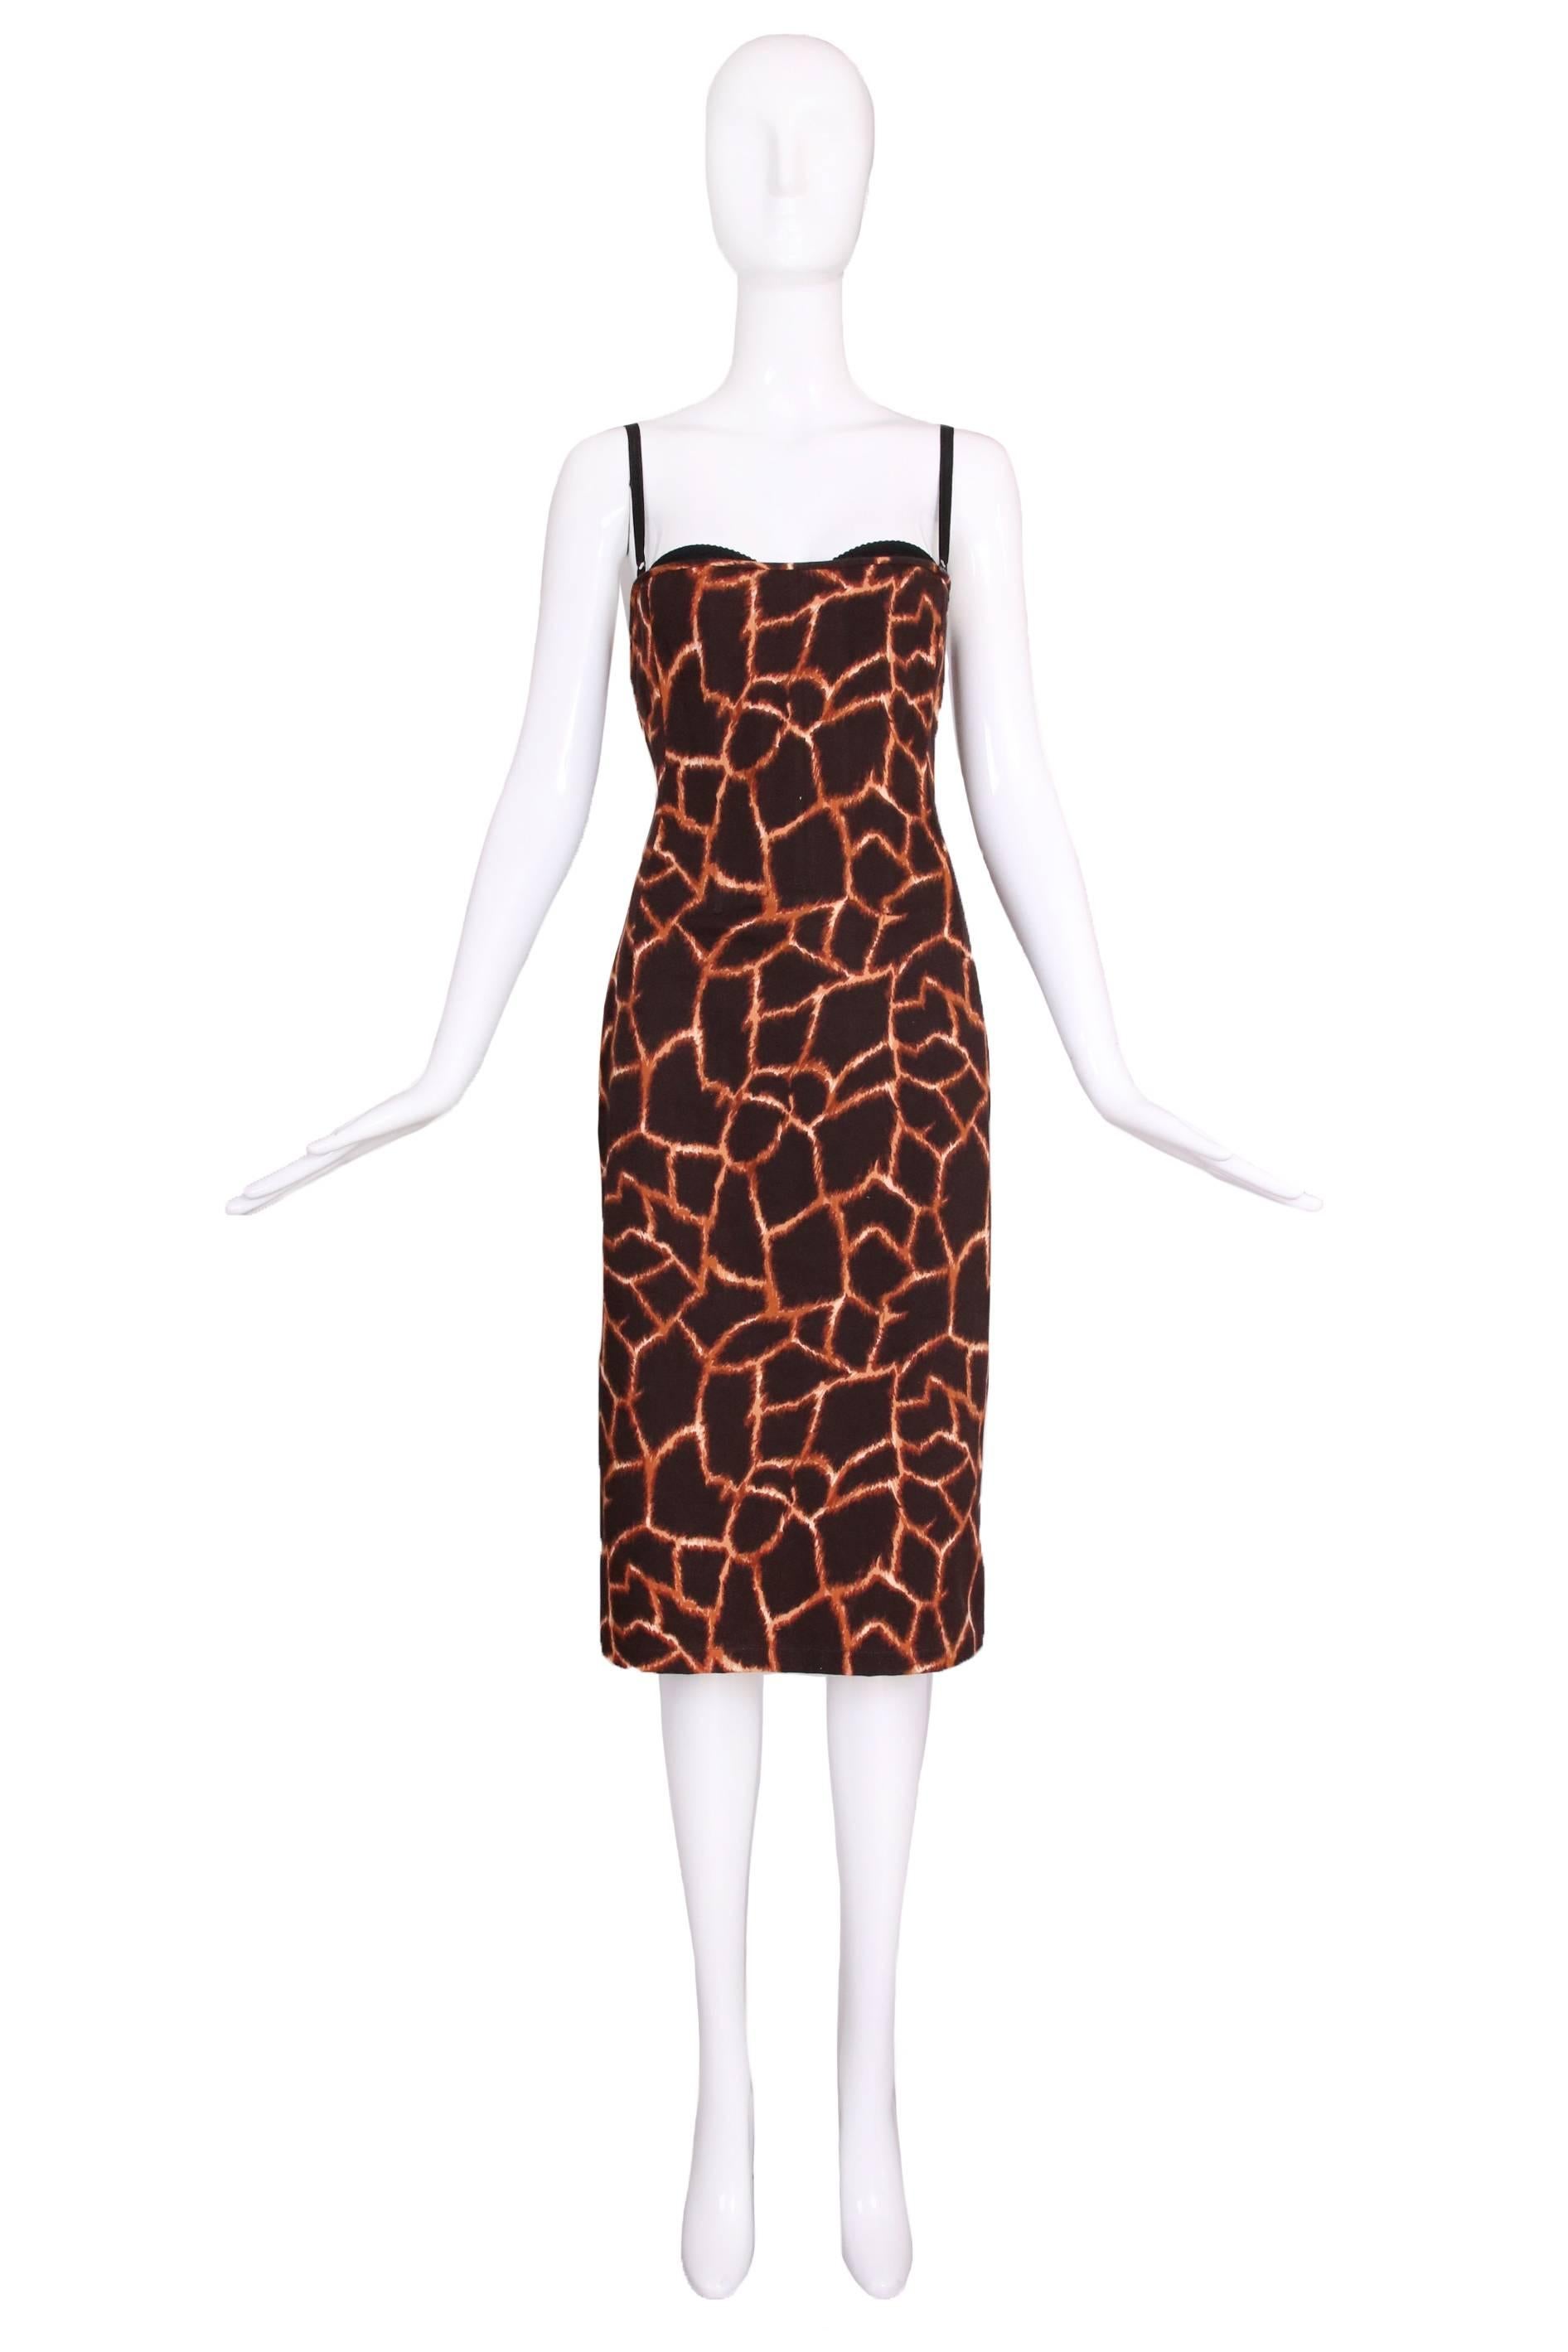 Dolce & Gabbana giraffe print bustier dress with body hugging silhouette. Fabric 98% cotton and 2% elastane. Size tag 38. In excellent condition.
MEASUREMENTS:
Bust - 32